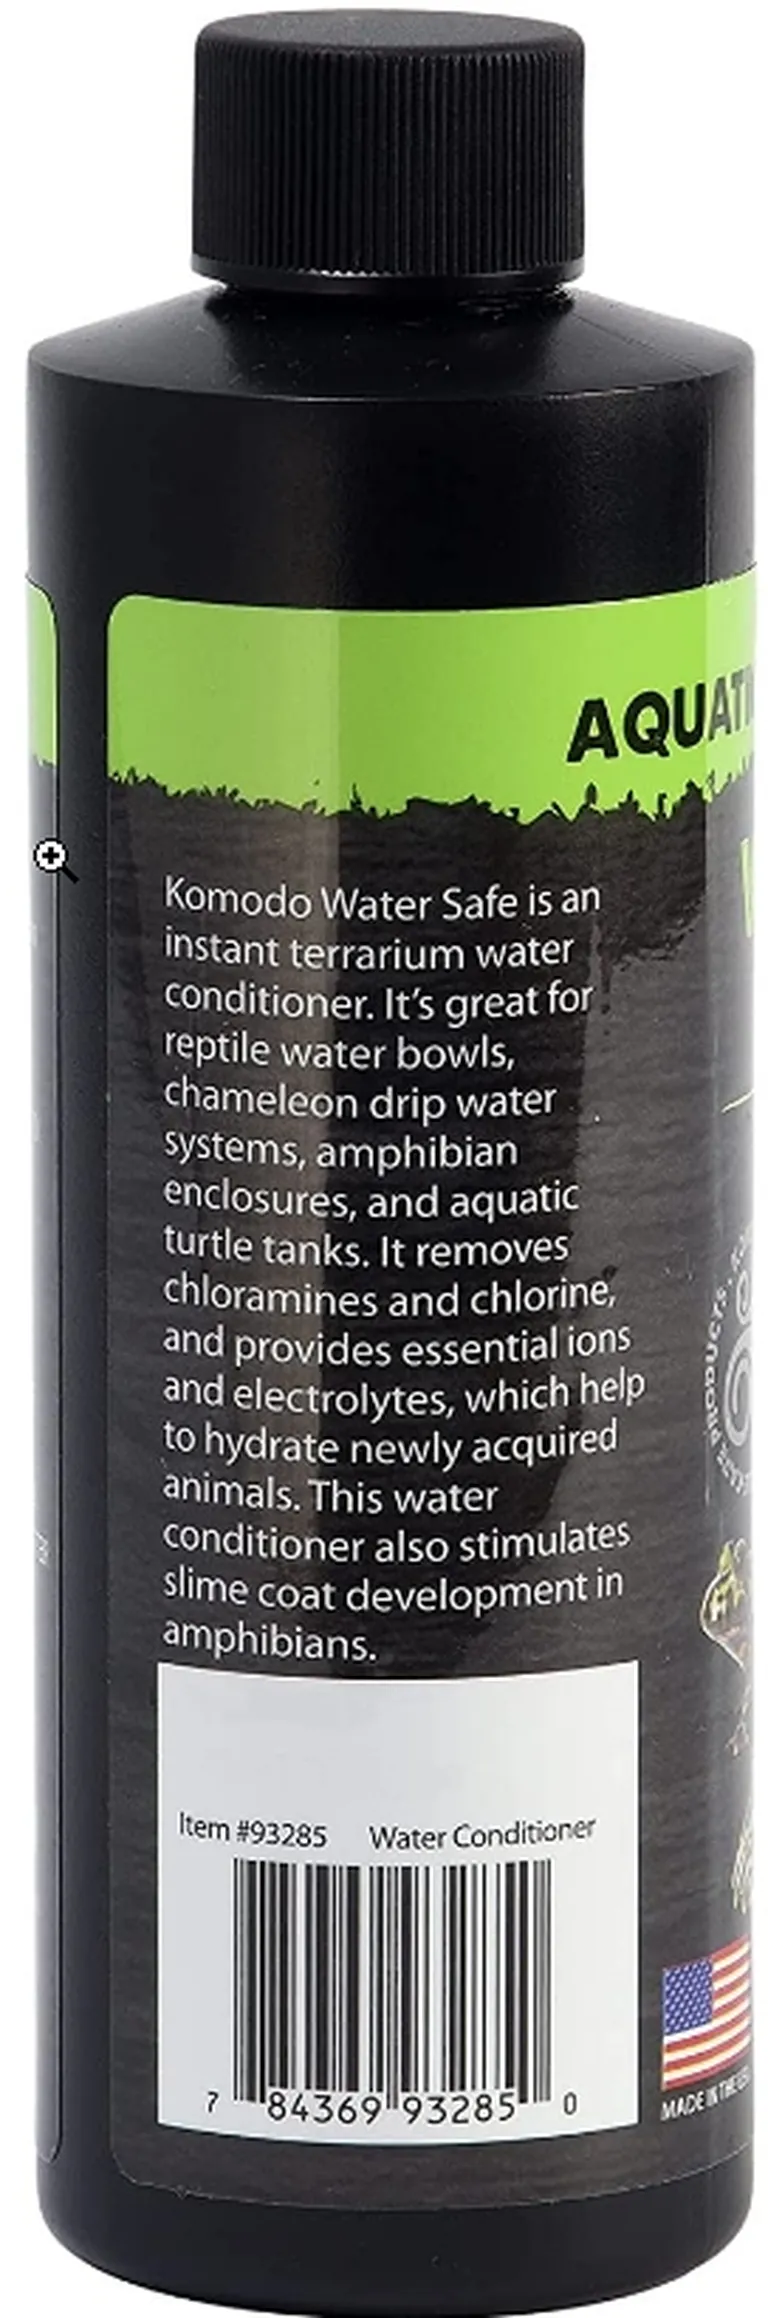 Komodo Water Safe Conditioner for Aquatic Reptiles and Amphibians Photo 2